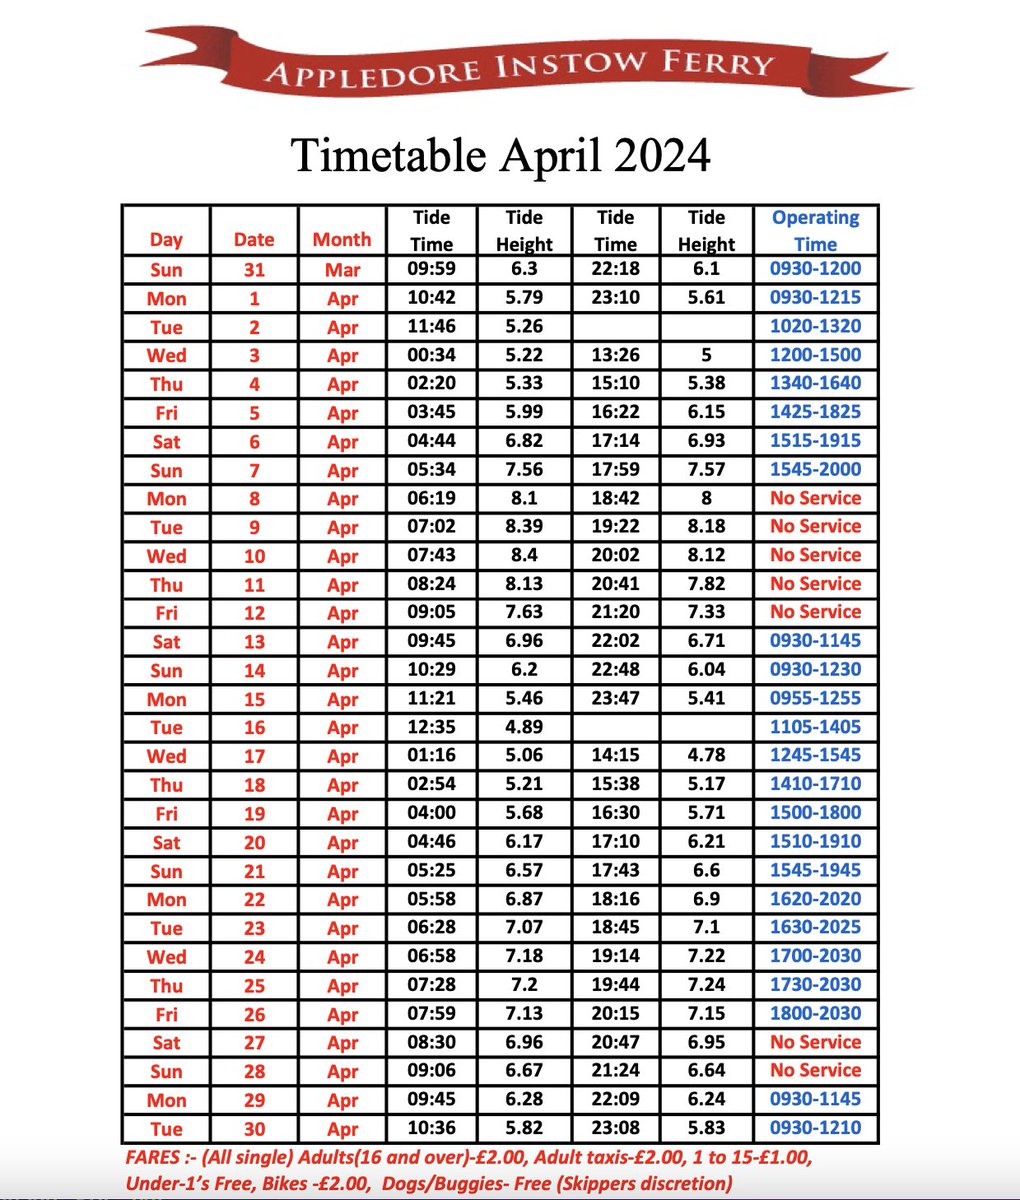 Here is the timetable for Appledore & Instow Ferry over the next couple of weeks